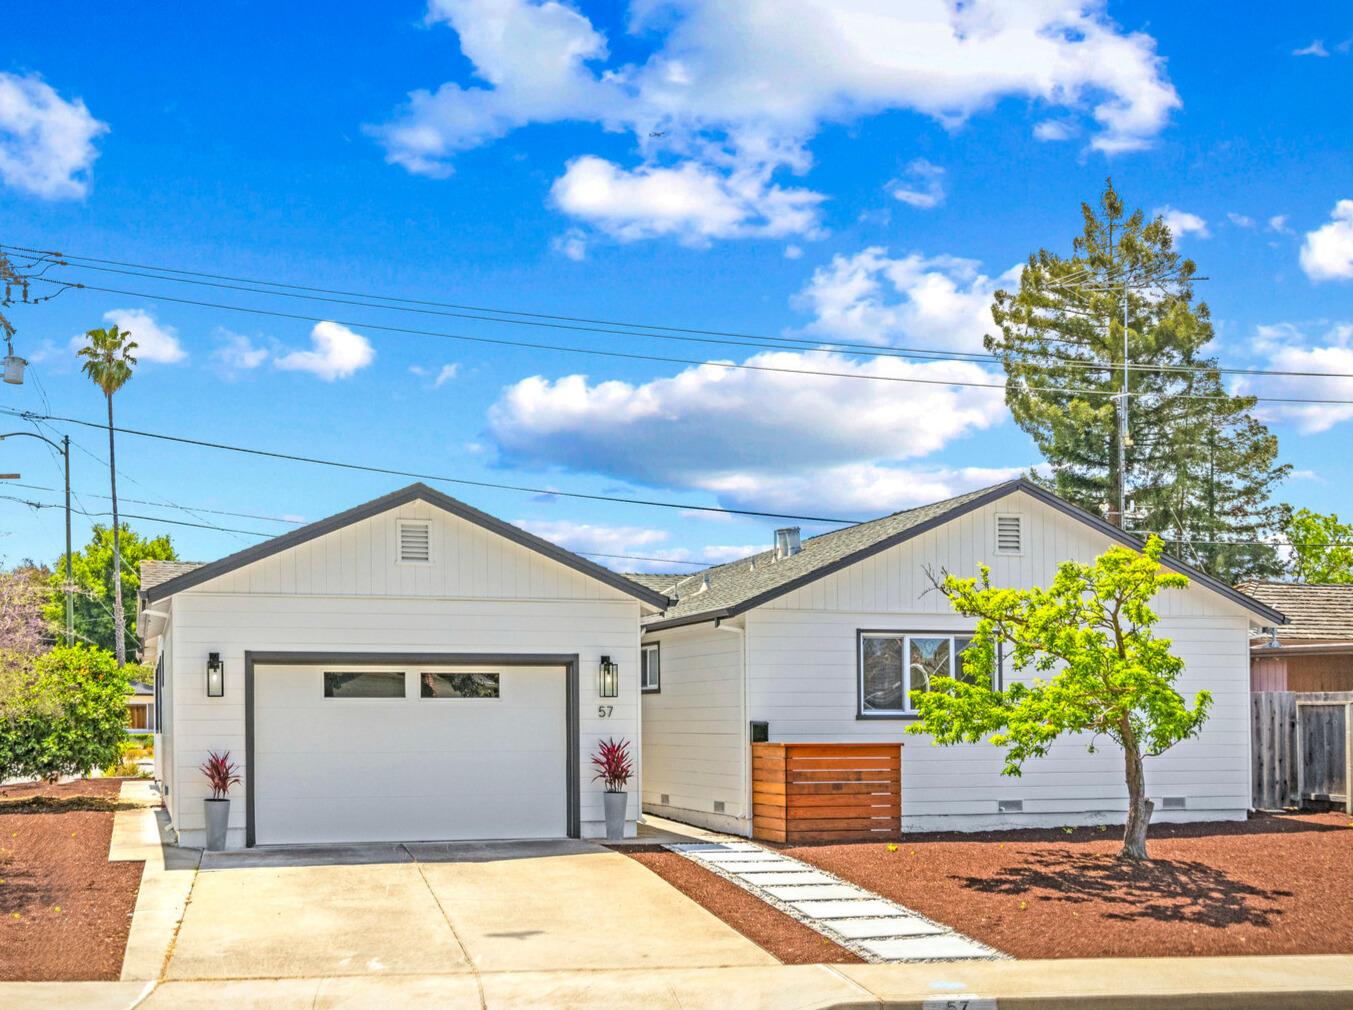 Photo of 57 Dalma Dr in Mountain View, CA